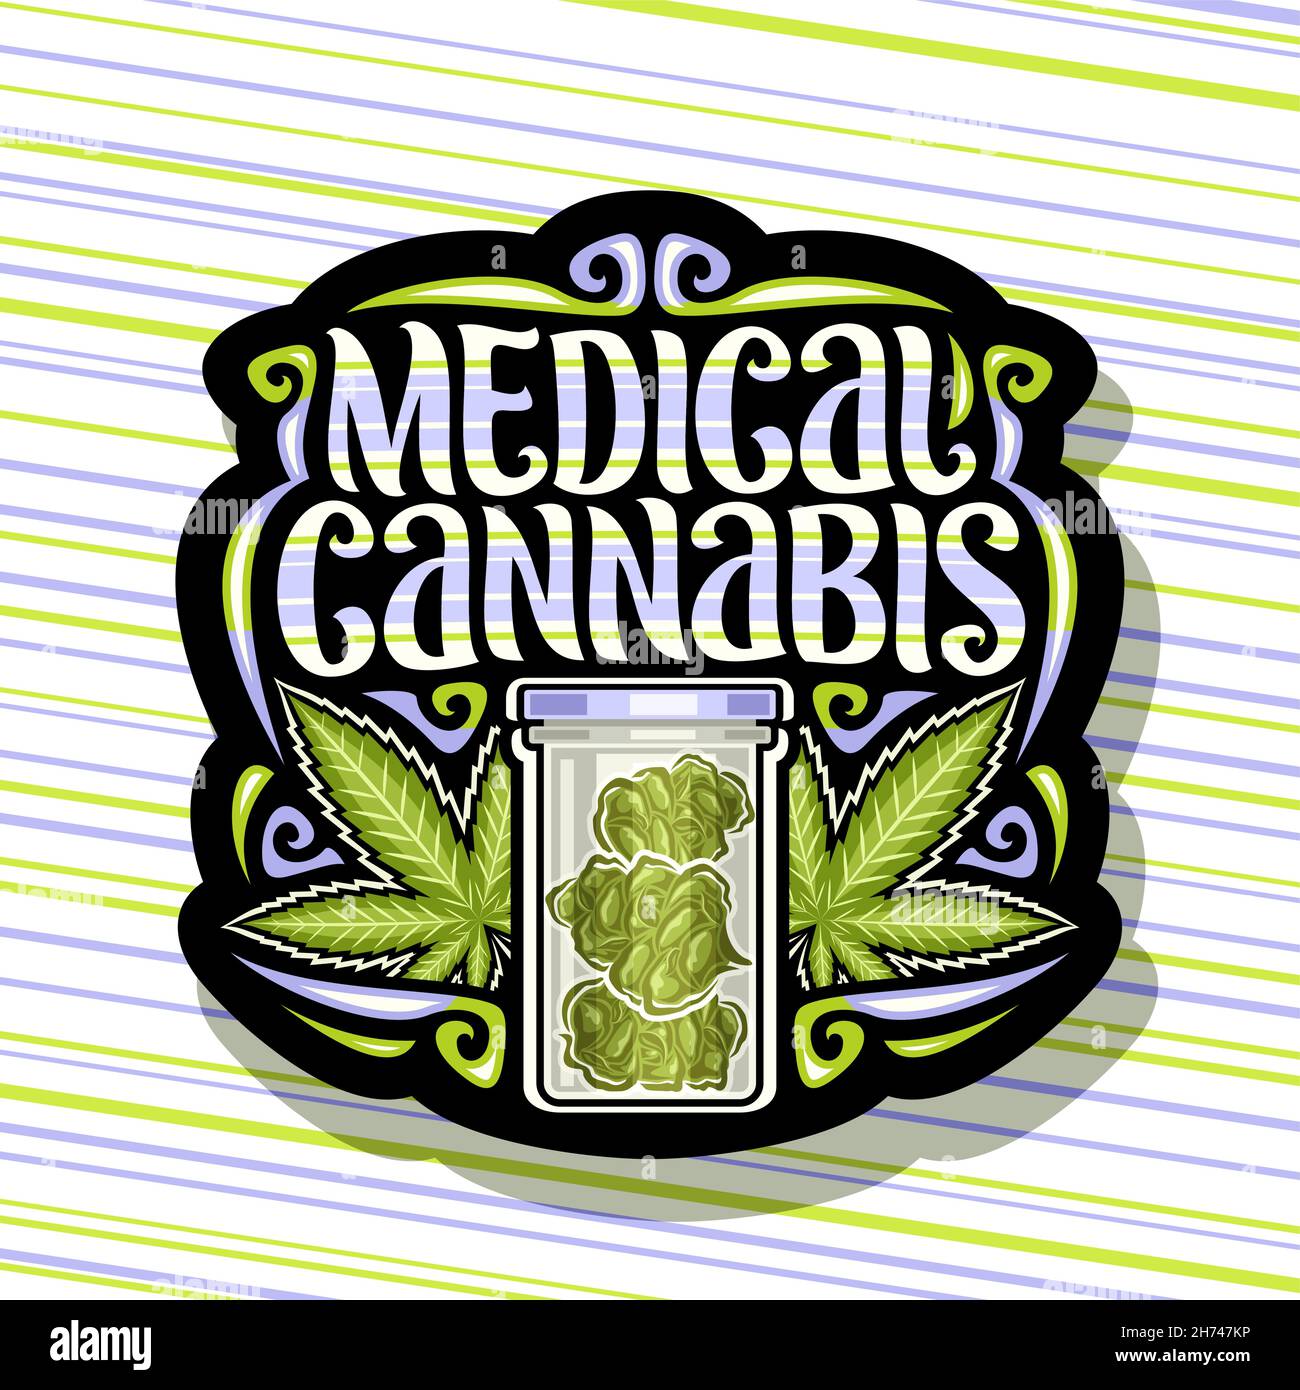 Vector logo for Medical Cannabis, dark vintage signage with illustration of marijuana leaves, glass cannabis test tube, signboard for dispensary with Stock Vector